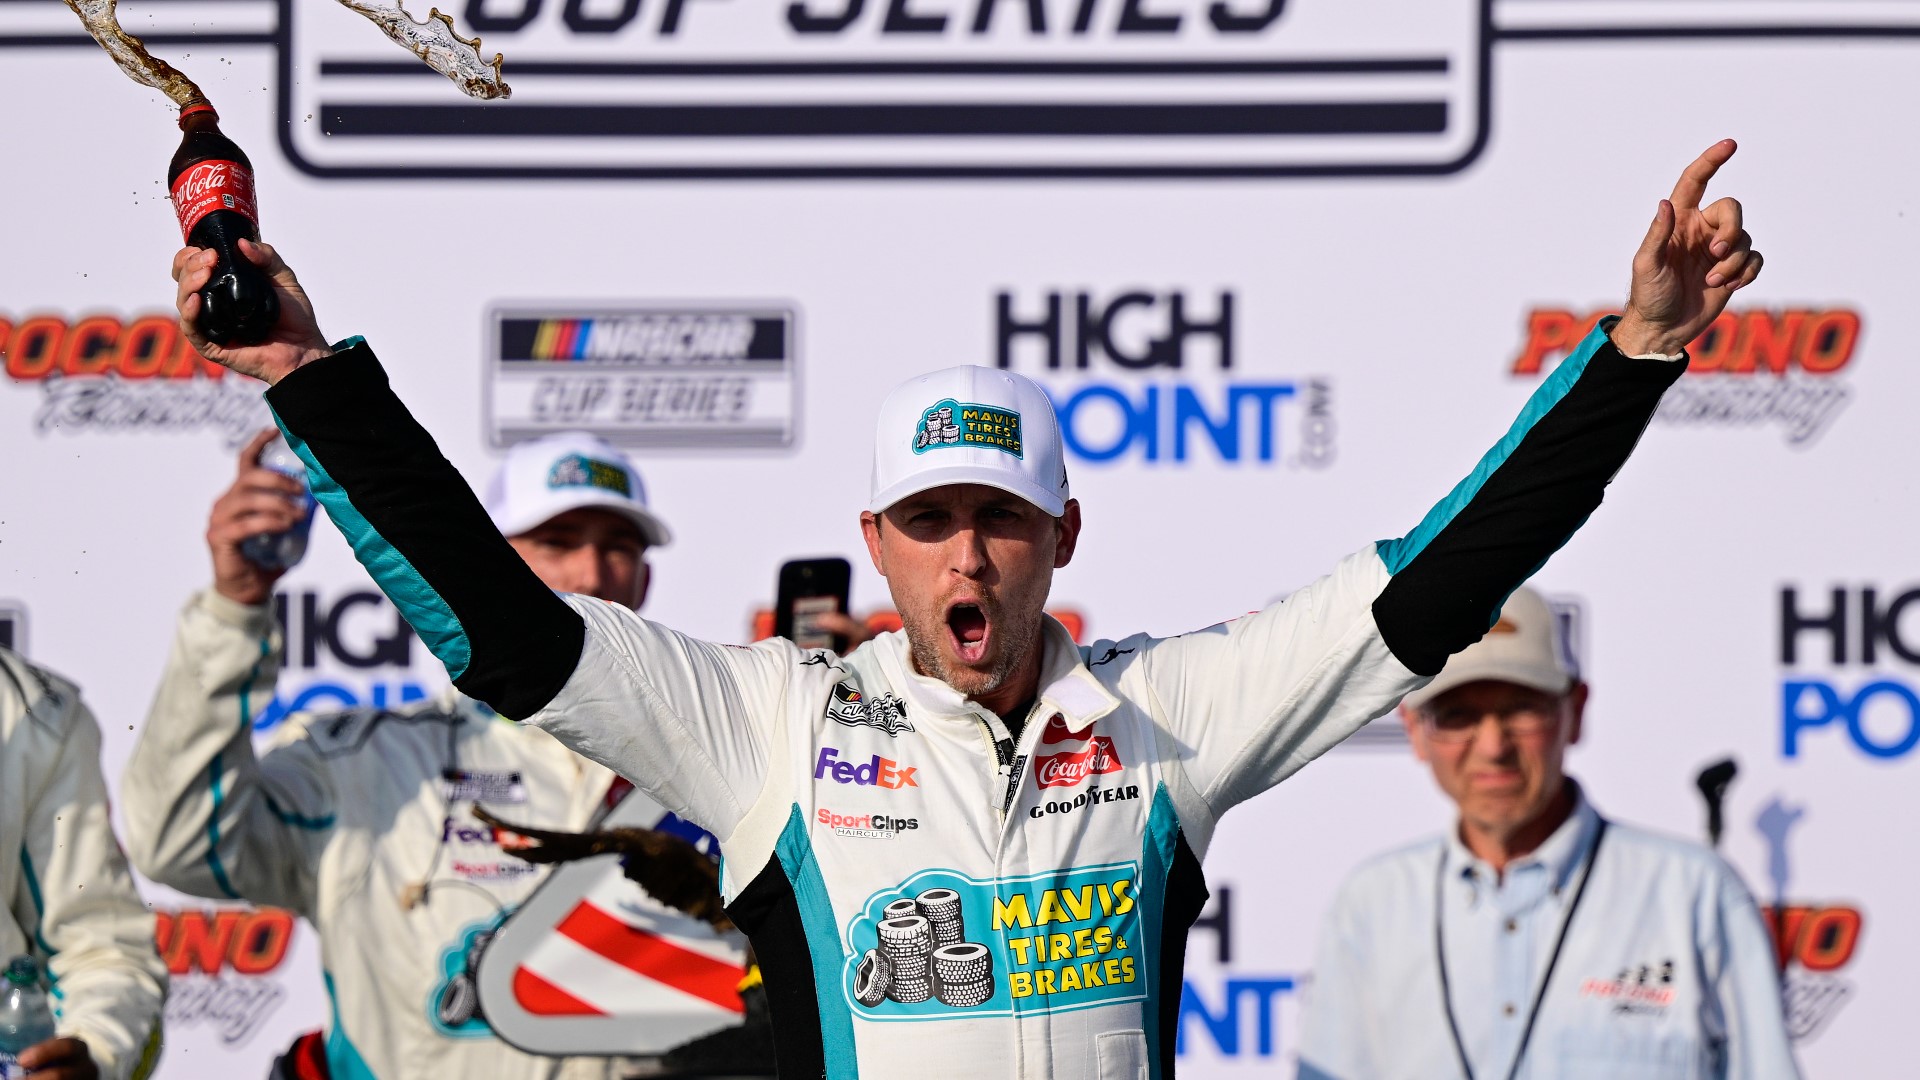 Hamlin is part of his 17th NASCAR playoffs and has reached the final championship four times: 2014, 2019, 2020 and 2021.